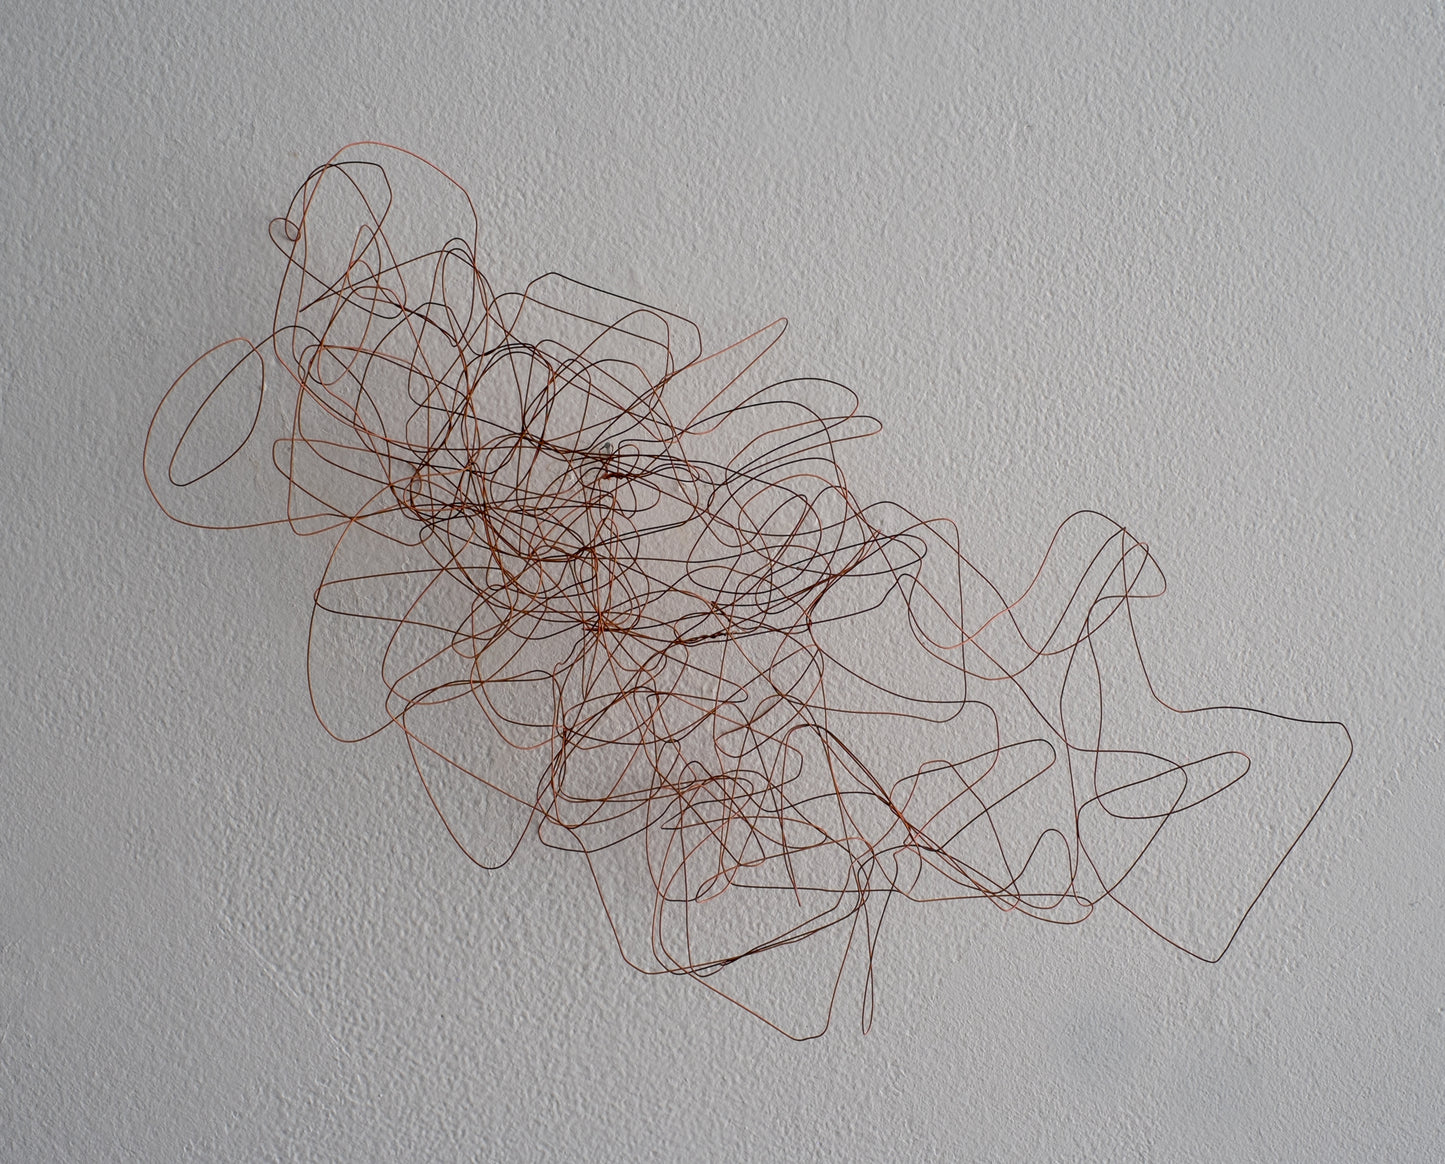 Sketch with Wire #1 by Kai Chan